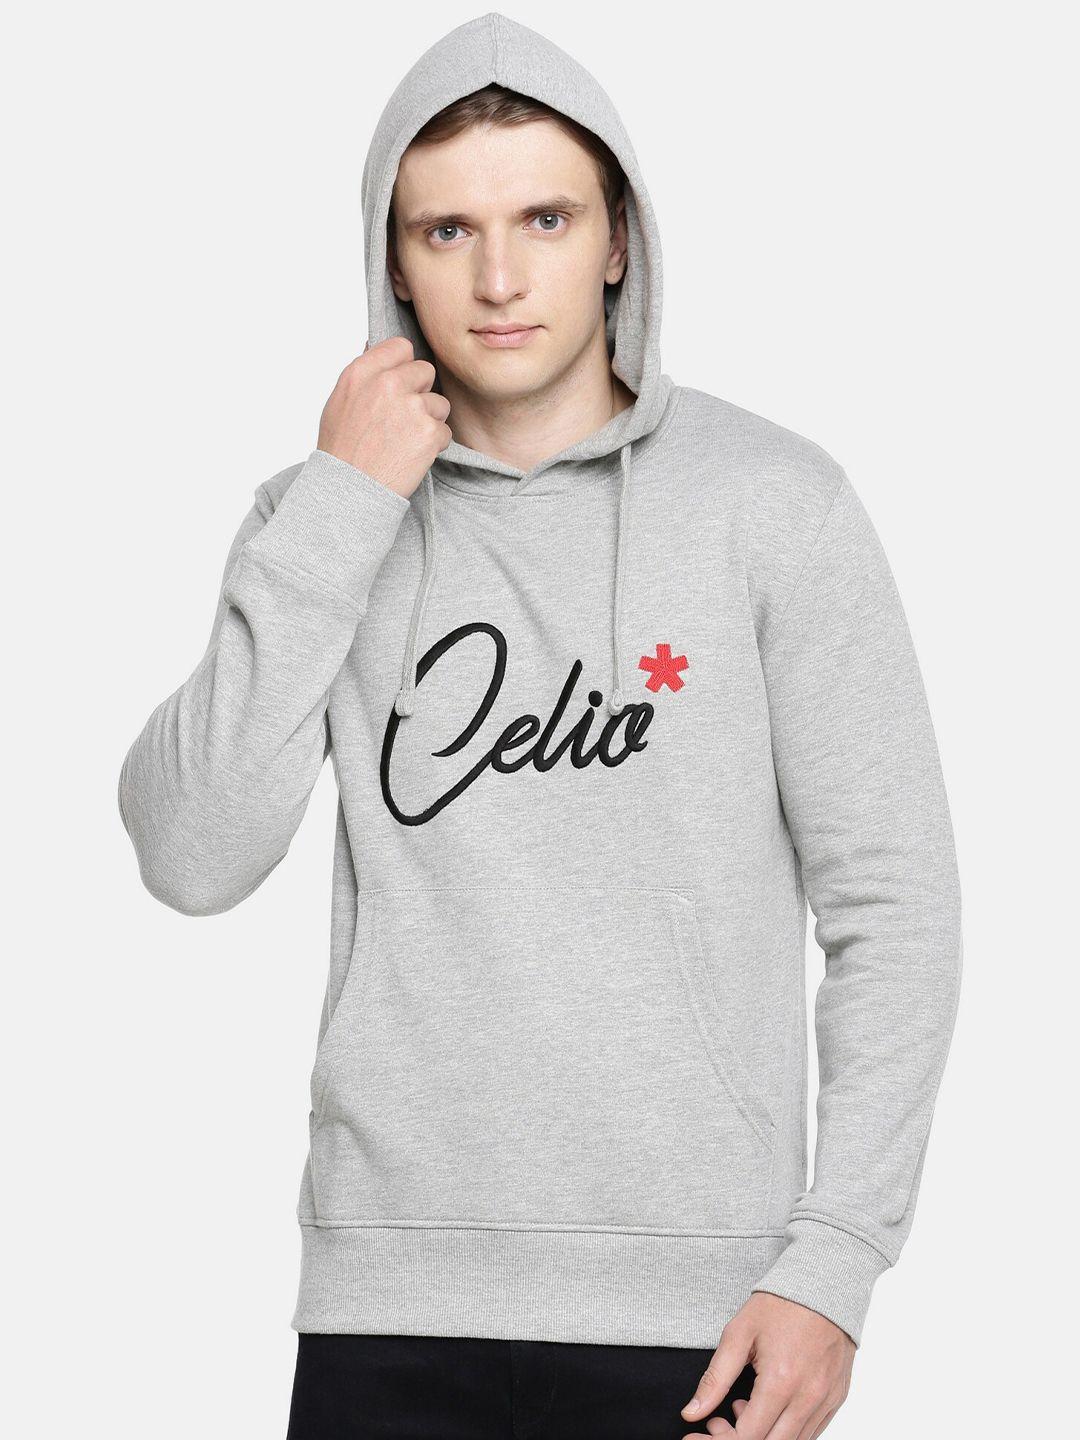 celio typography printed hooded pullover